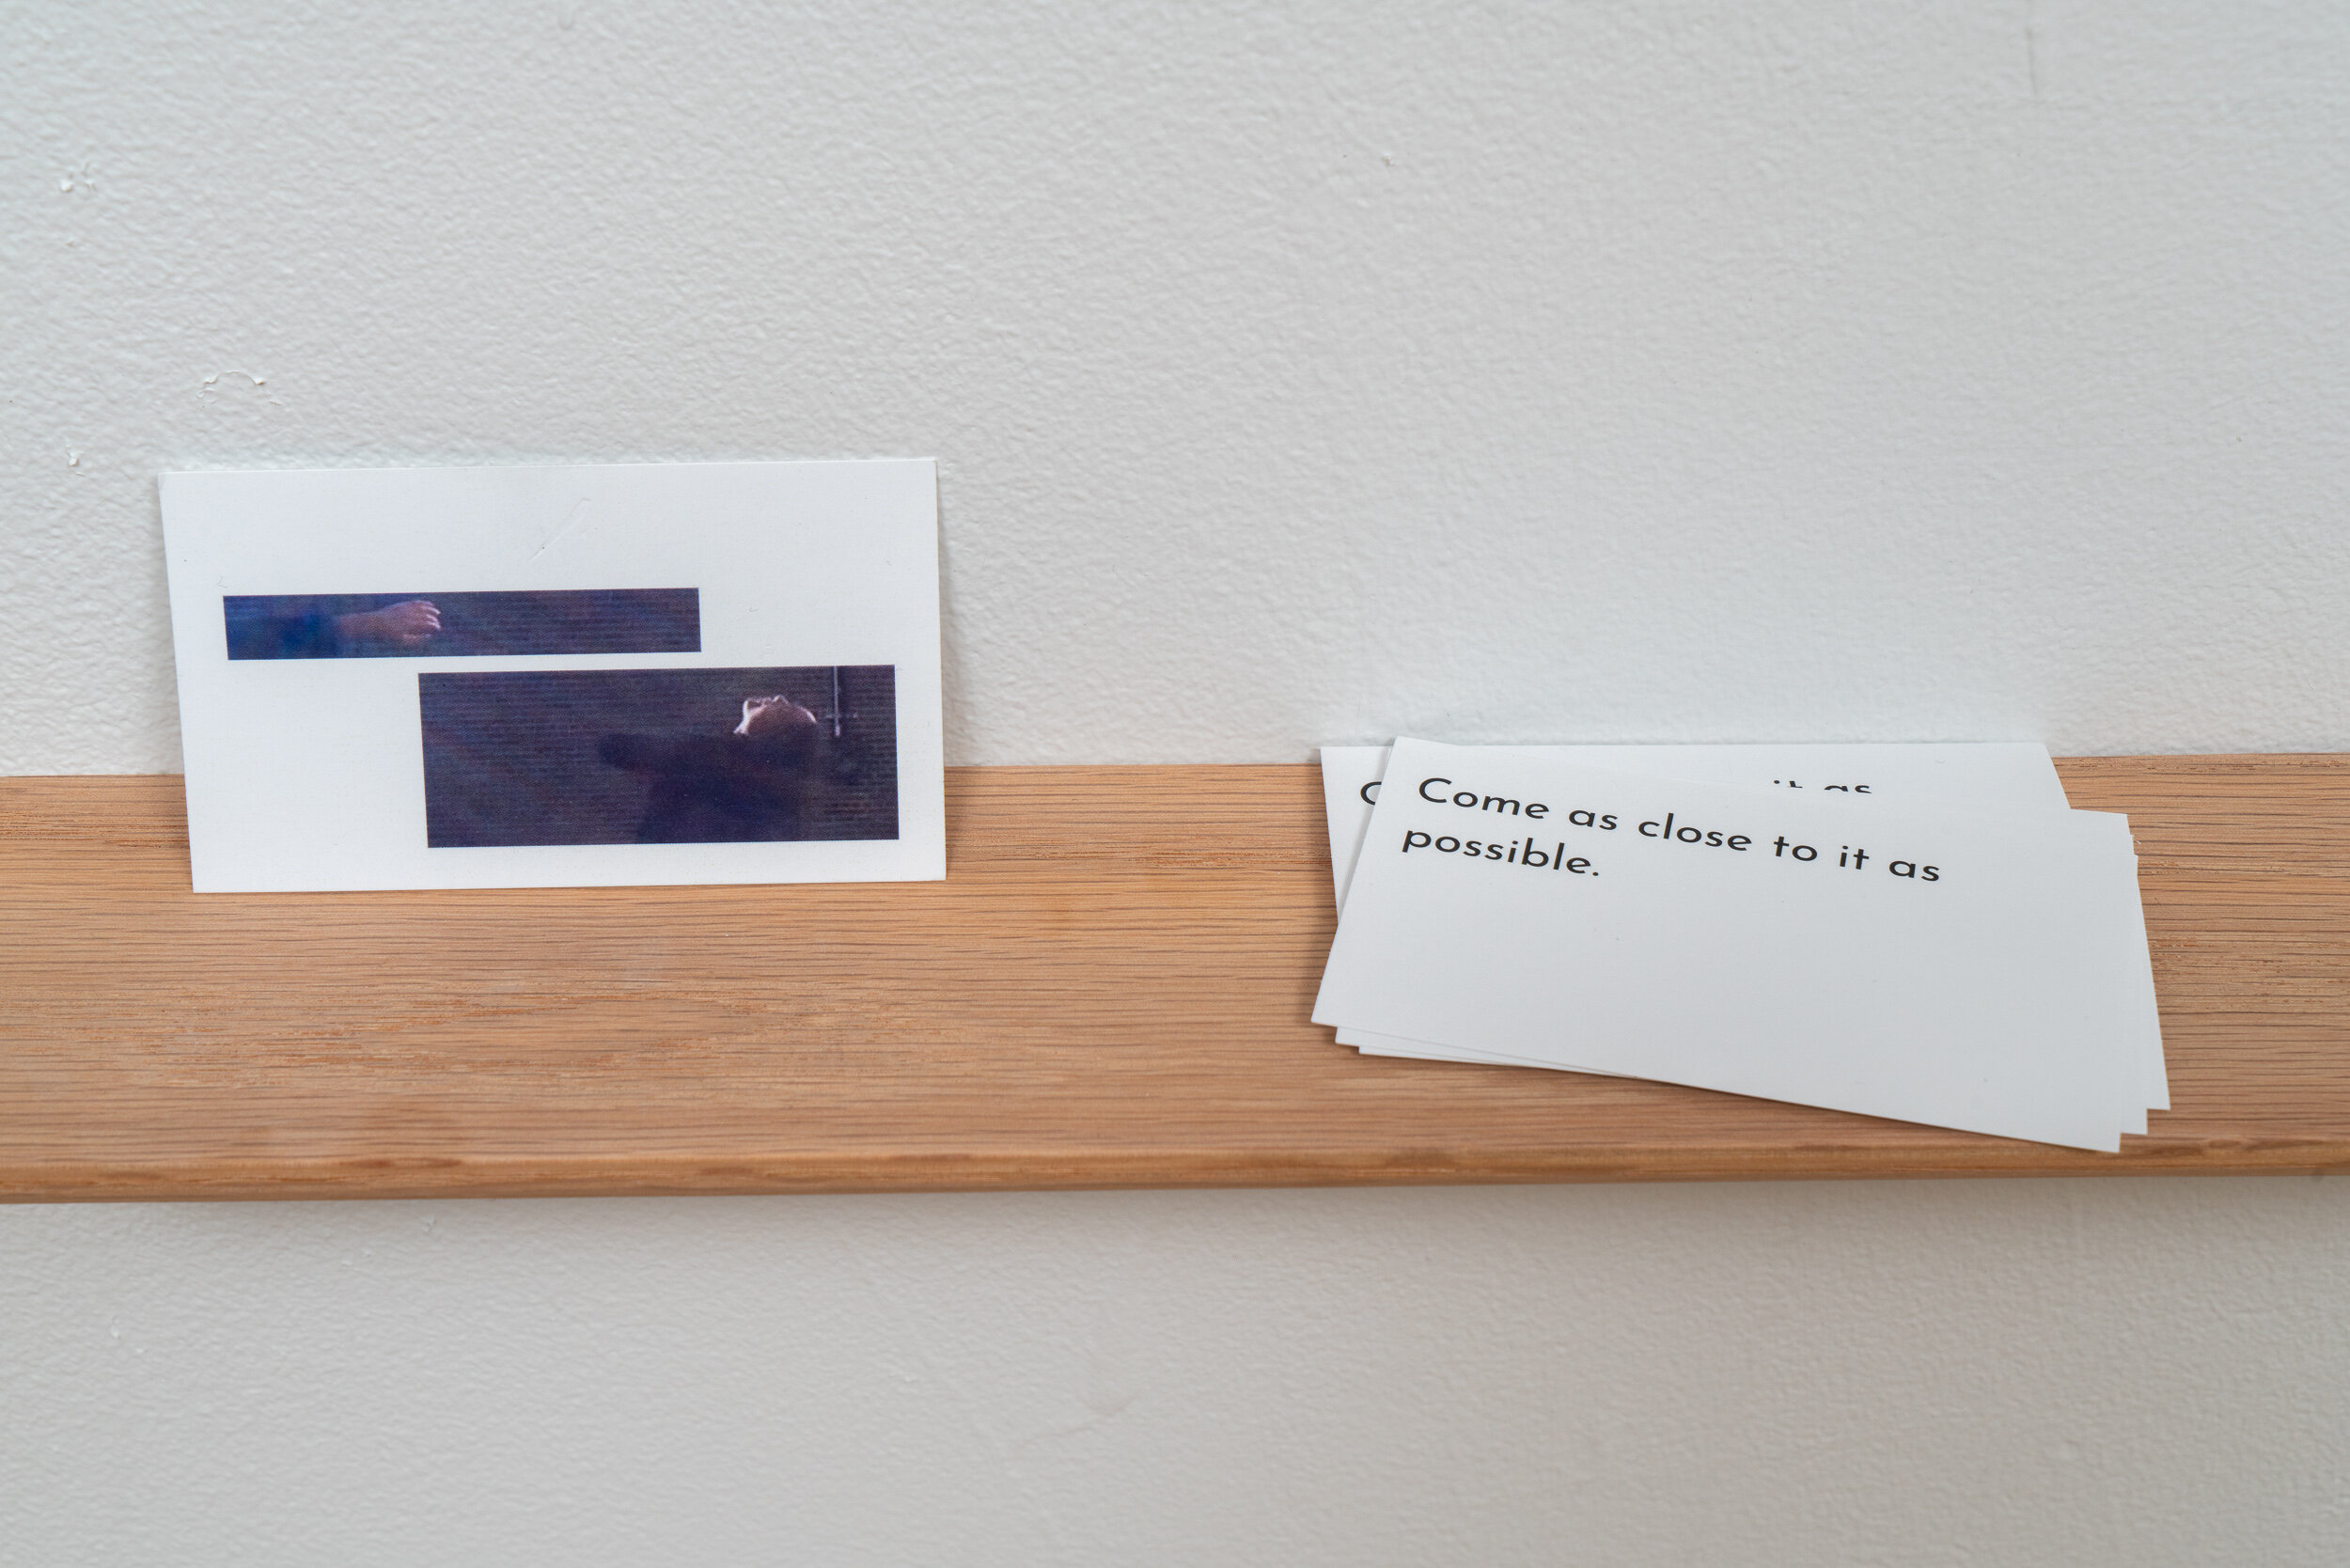  Our Collective Act,  FESTAC Gestures Sketch , 2020. Mirror, wooden shelf, and index cards. Photo by Robert Chase Heishman 